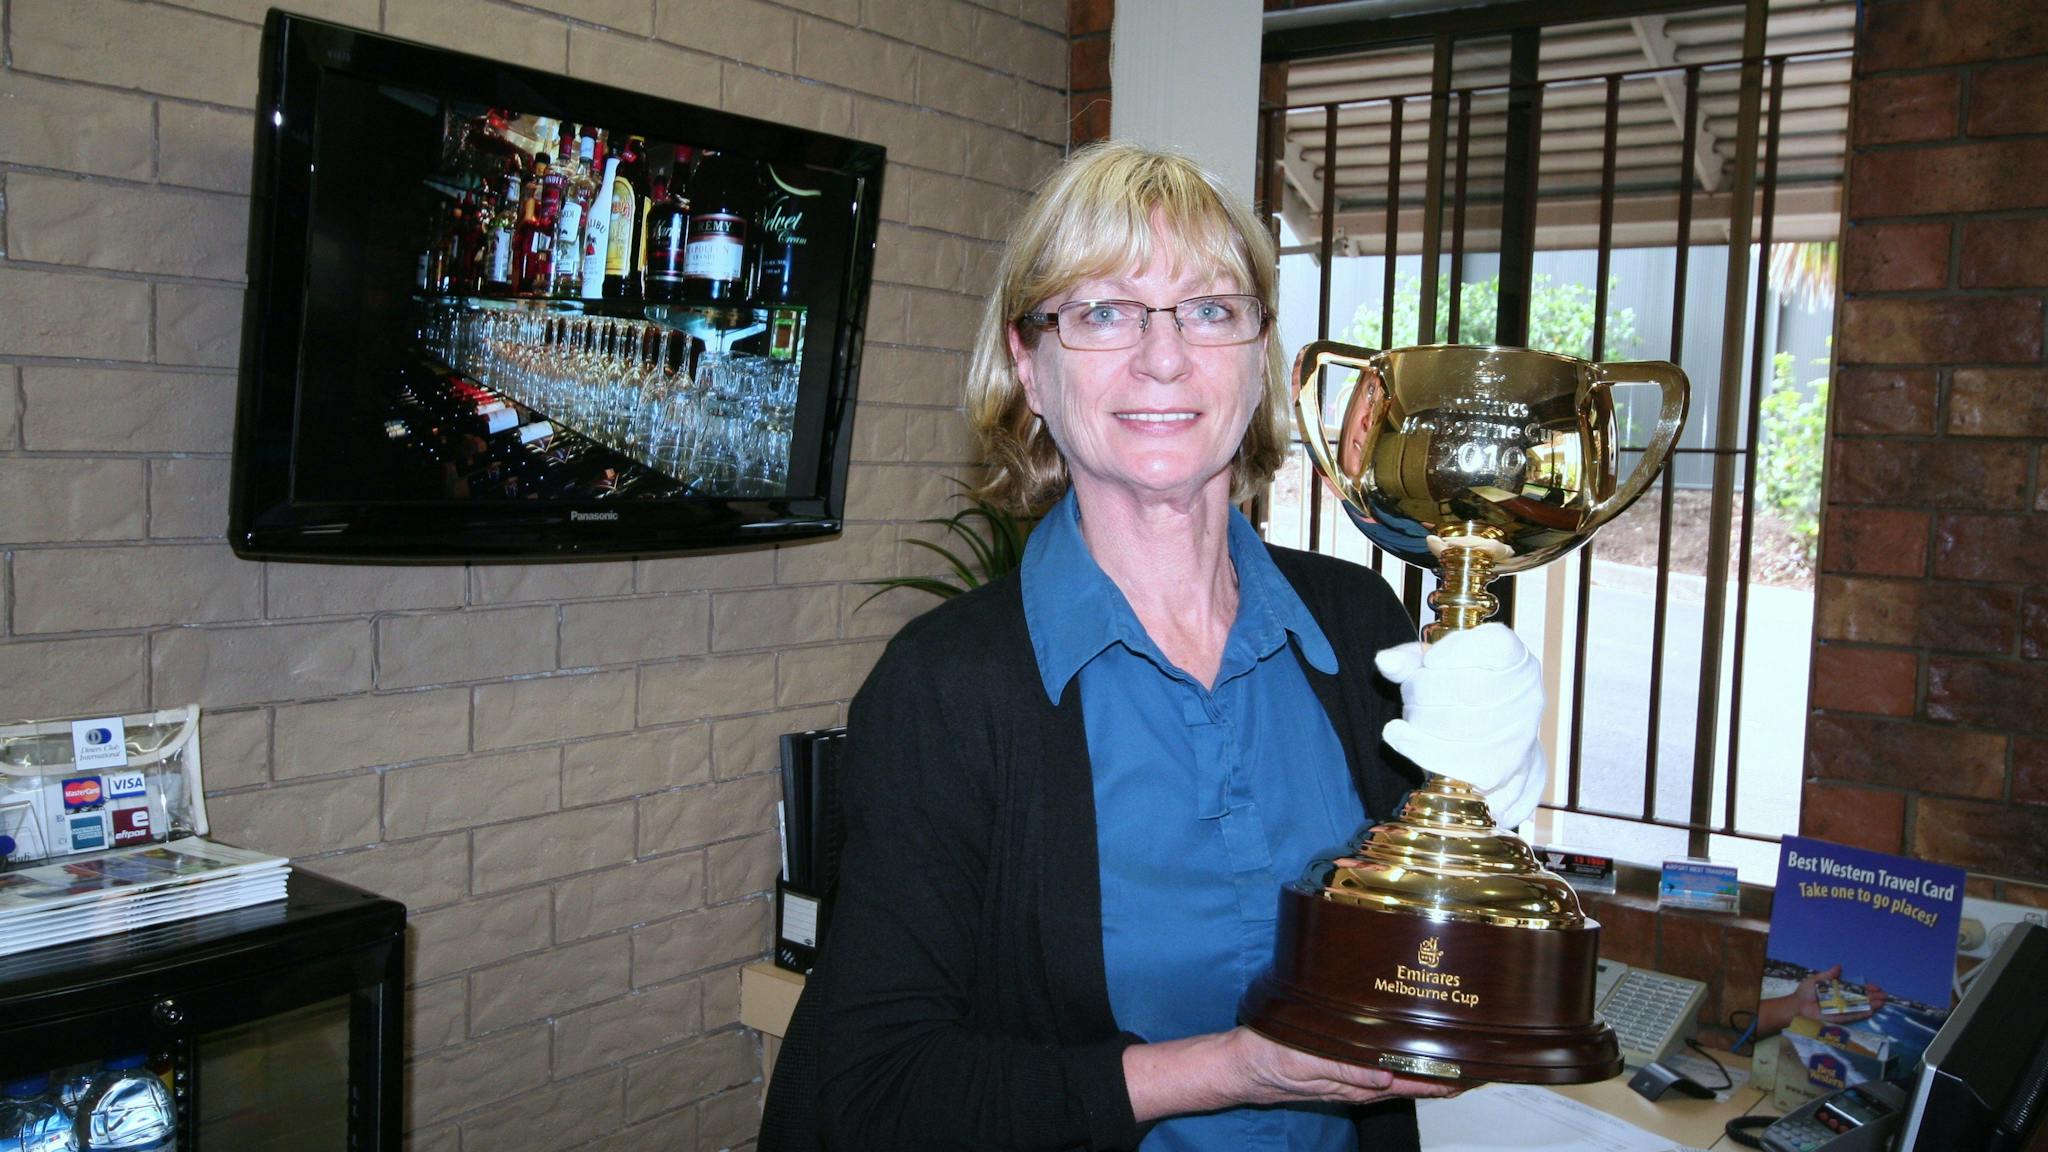 The Melbourne Cup stays at Best Western Ipswich Hotel